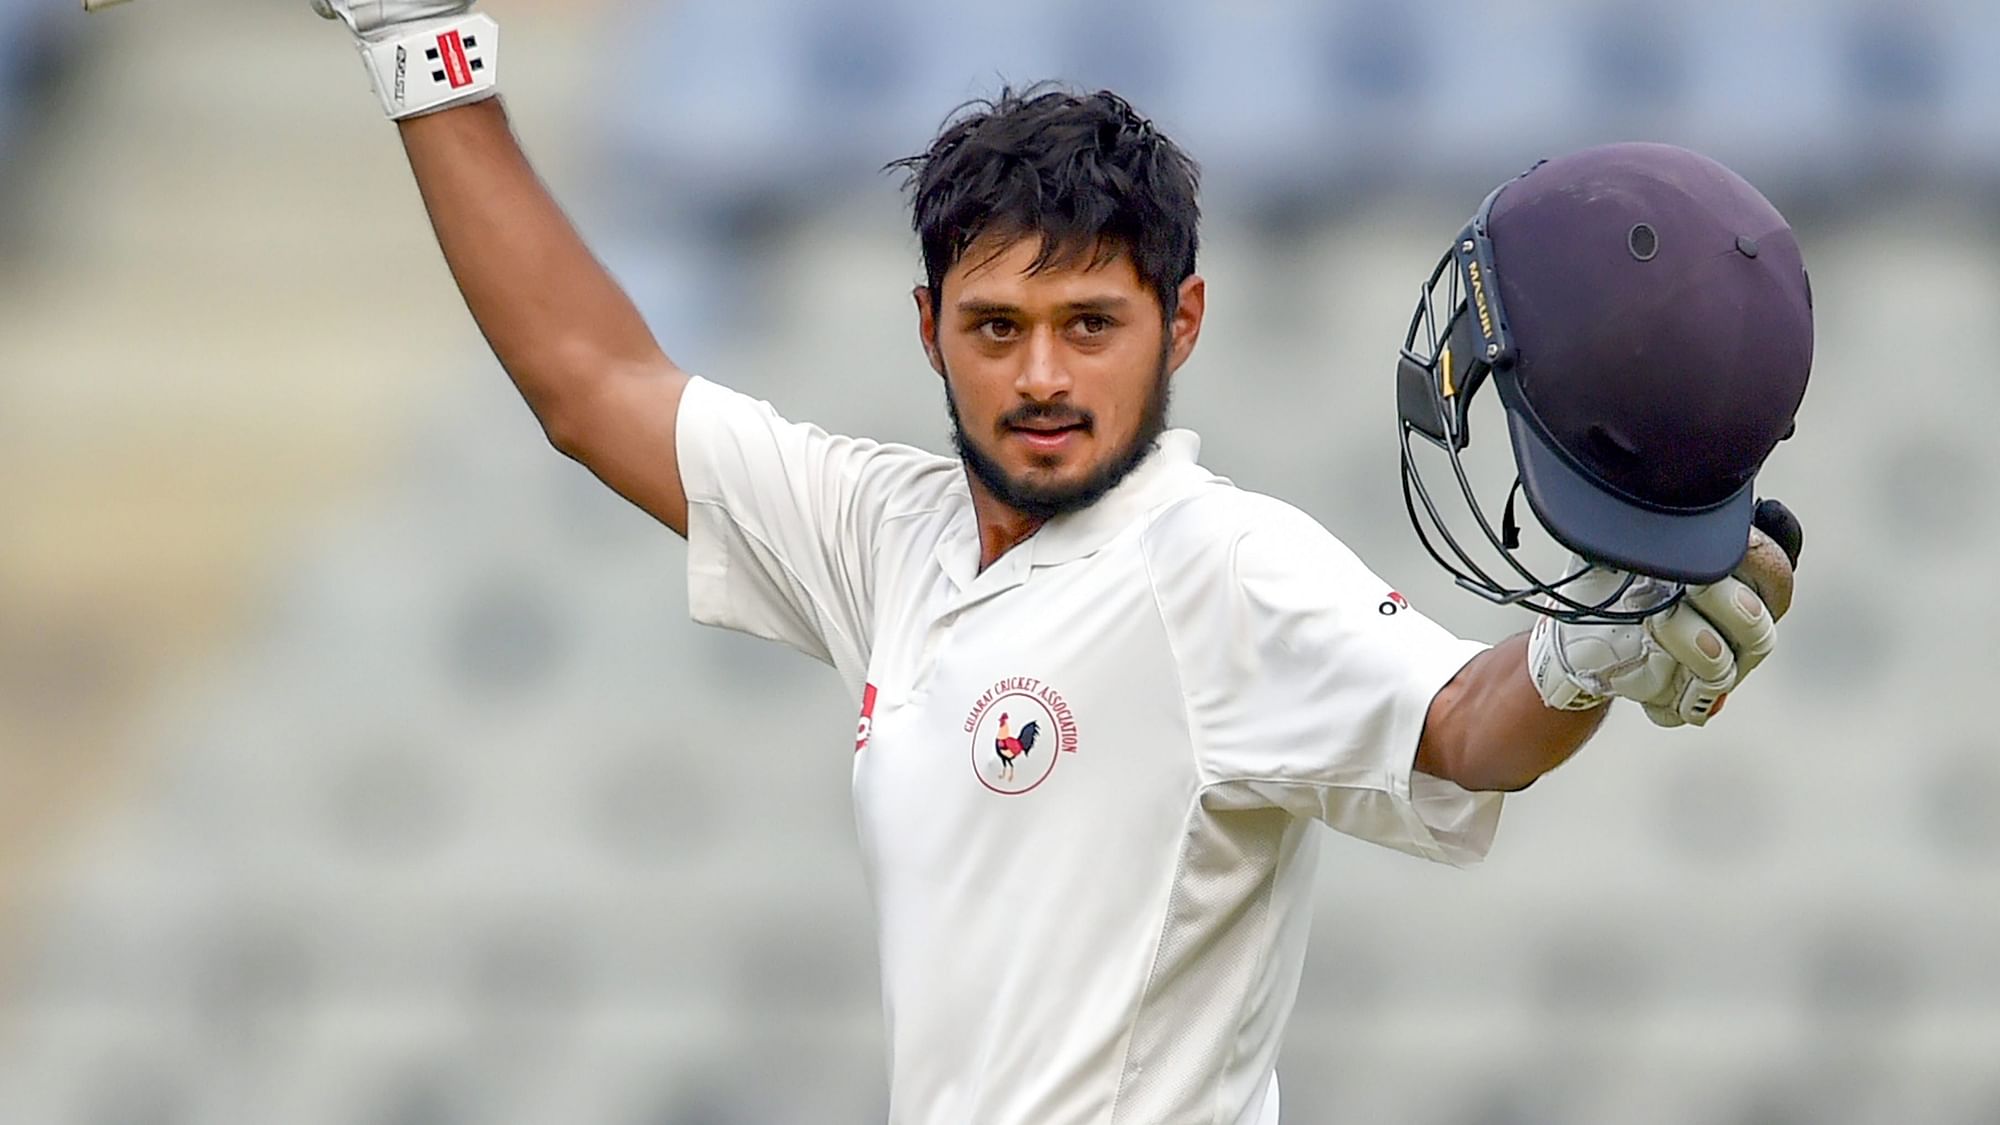 Fully aware that there is no opening for him in the current Indian Test team, promising Gujarat top-order batsman Priyank Panchal wants to keep scoring runs consistently to remain in the hunt.